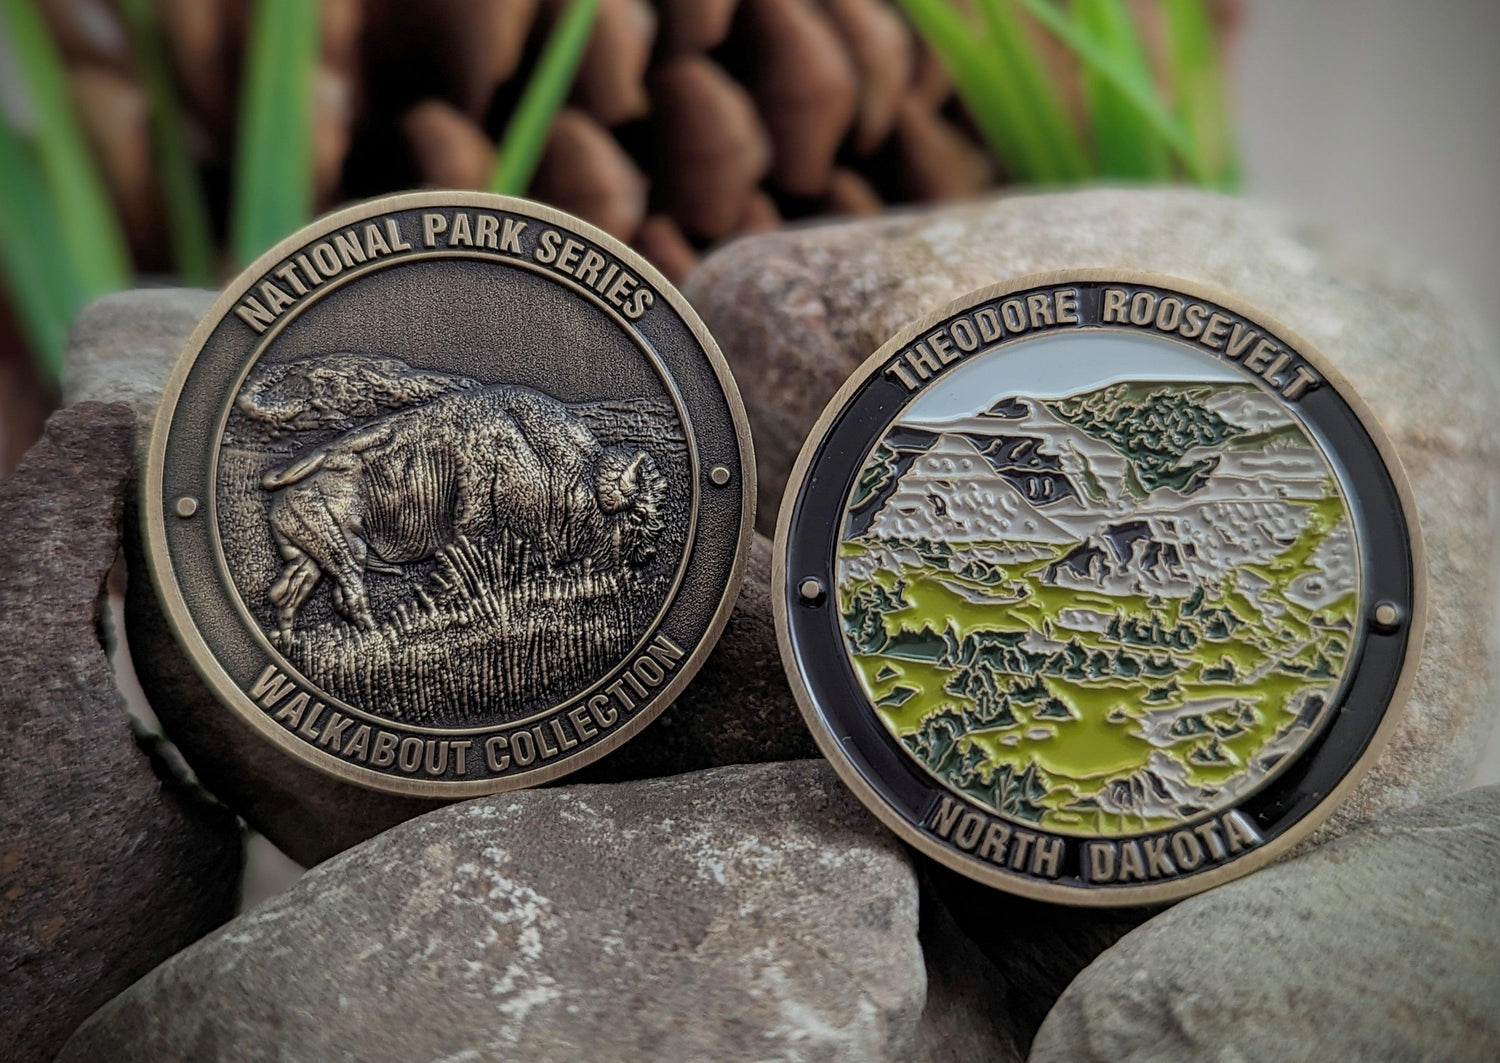 THEODORE ROOSEVELT NATIONAL PARK CHALLENGE COIN